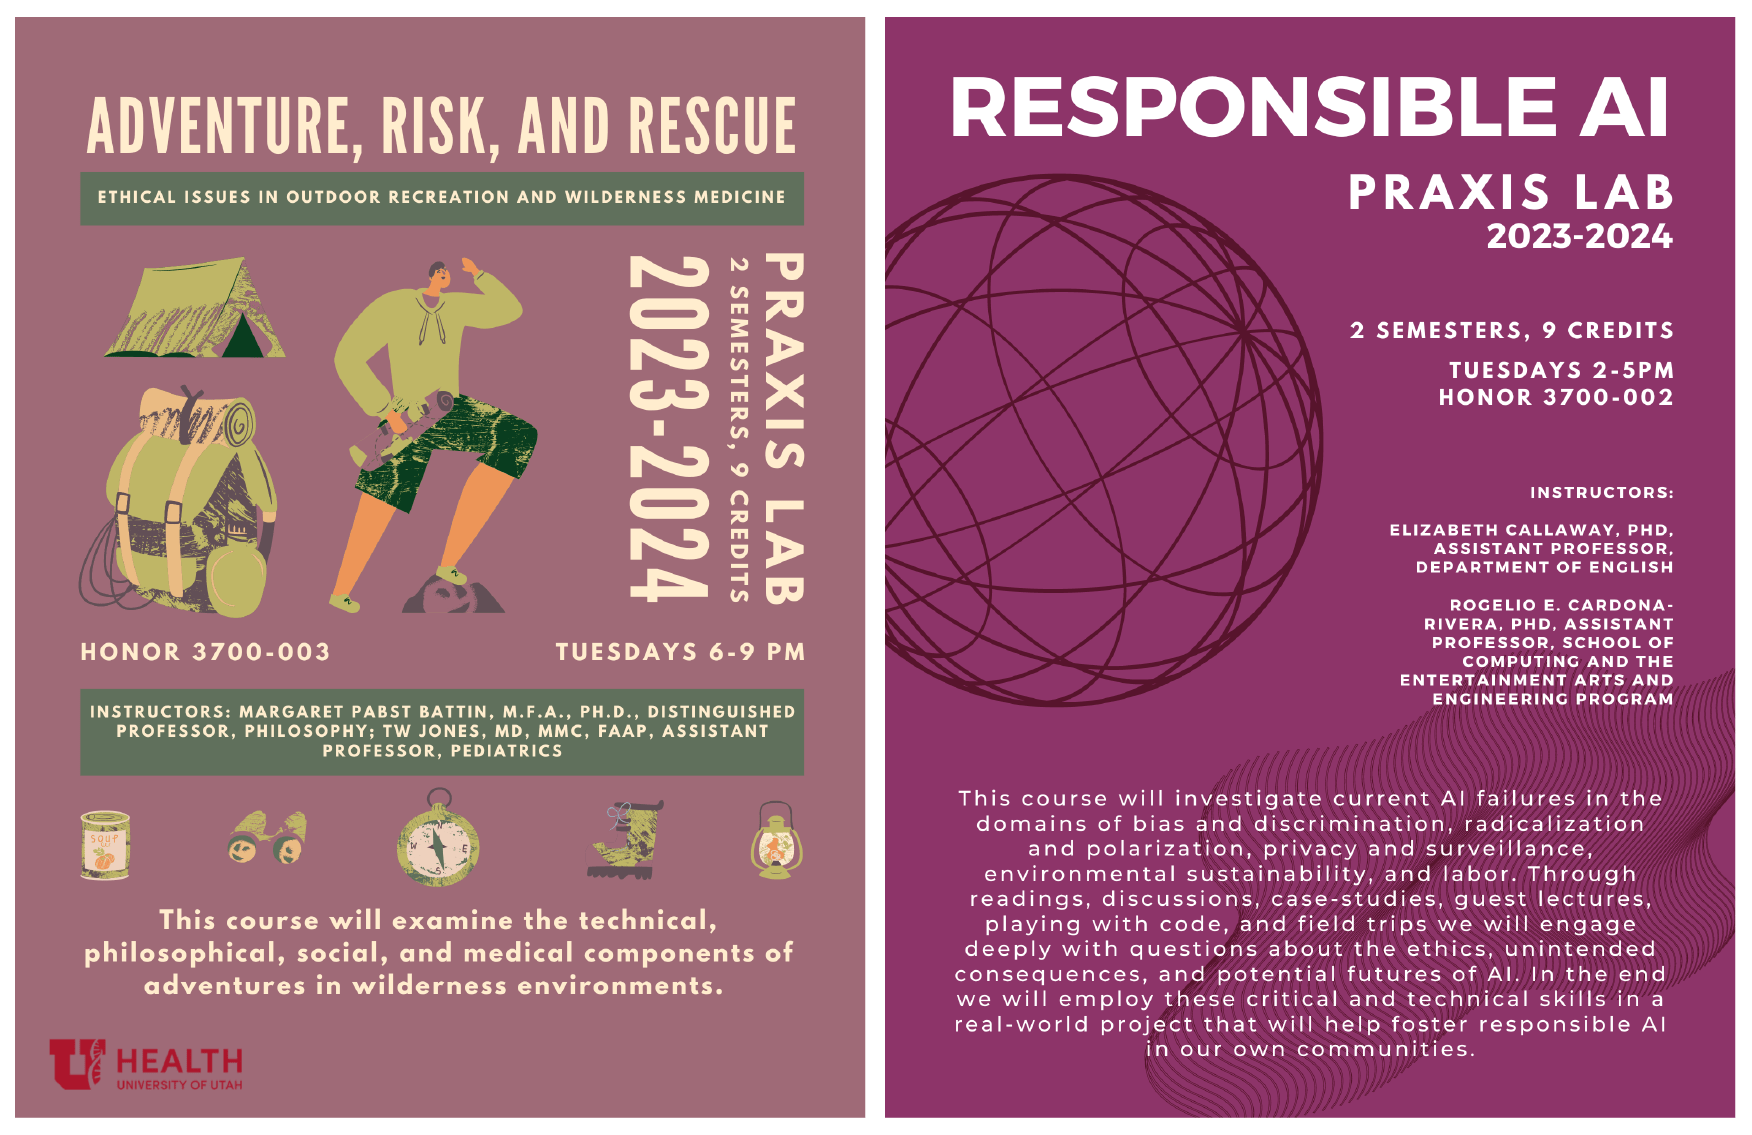 Praxis lap posters